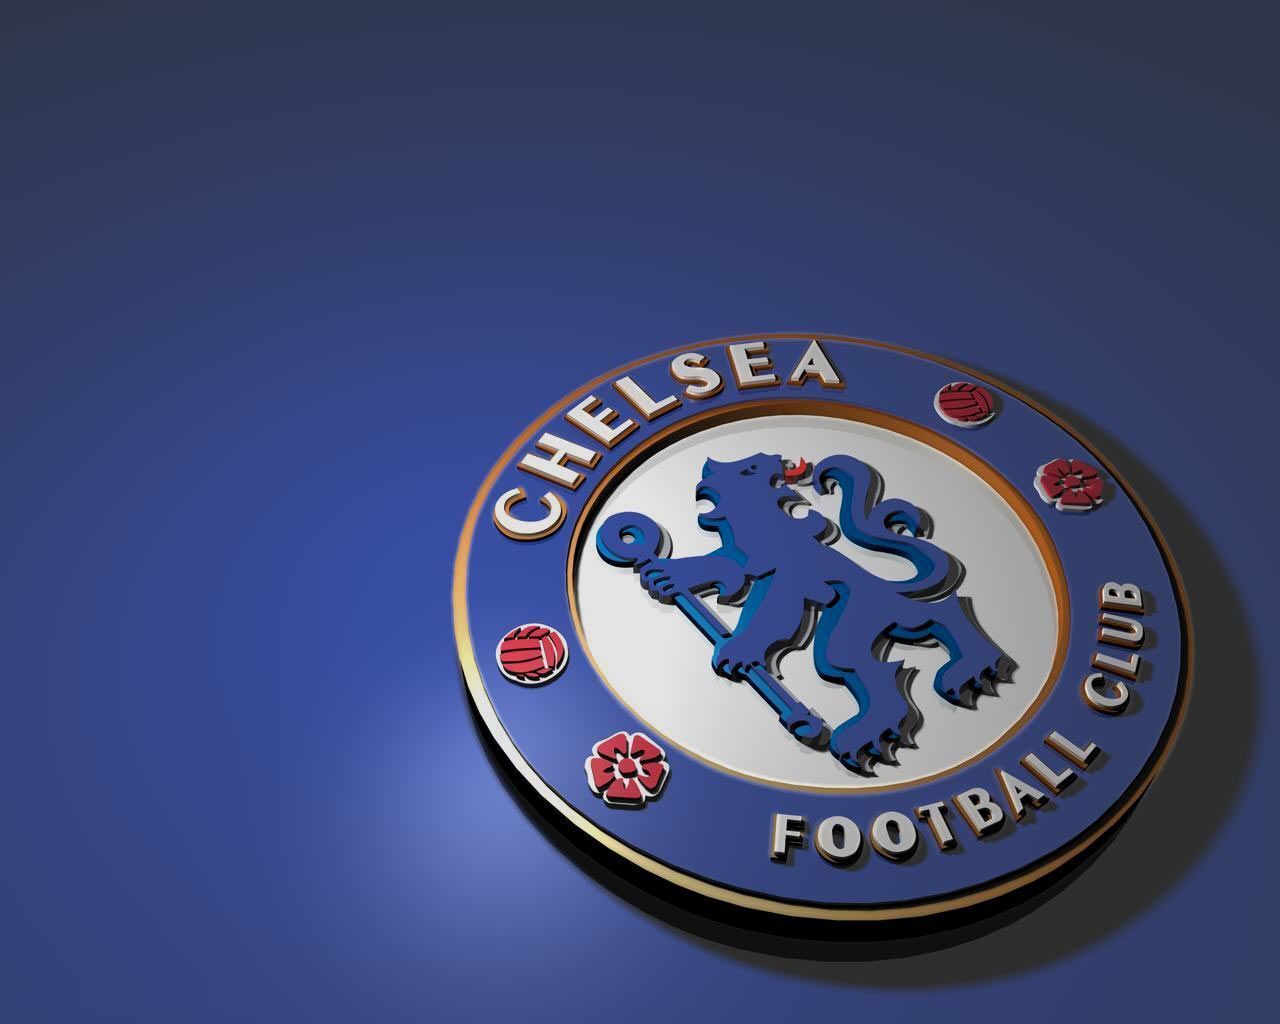 1920x1200px Chelsea Fc Wallpapers Pride Of London | #330685